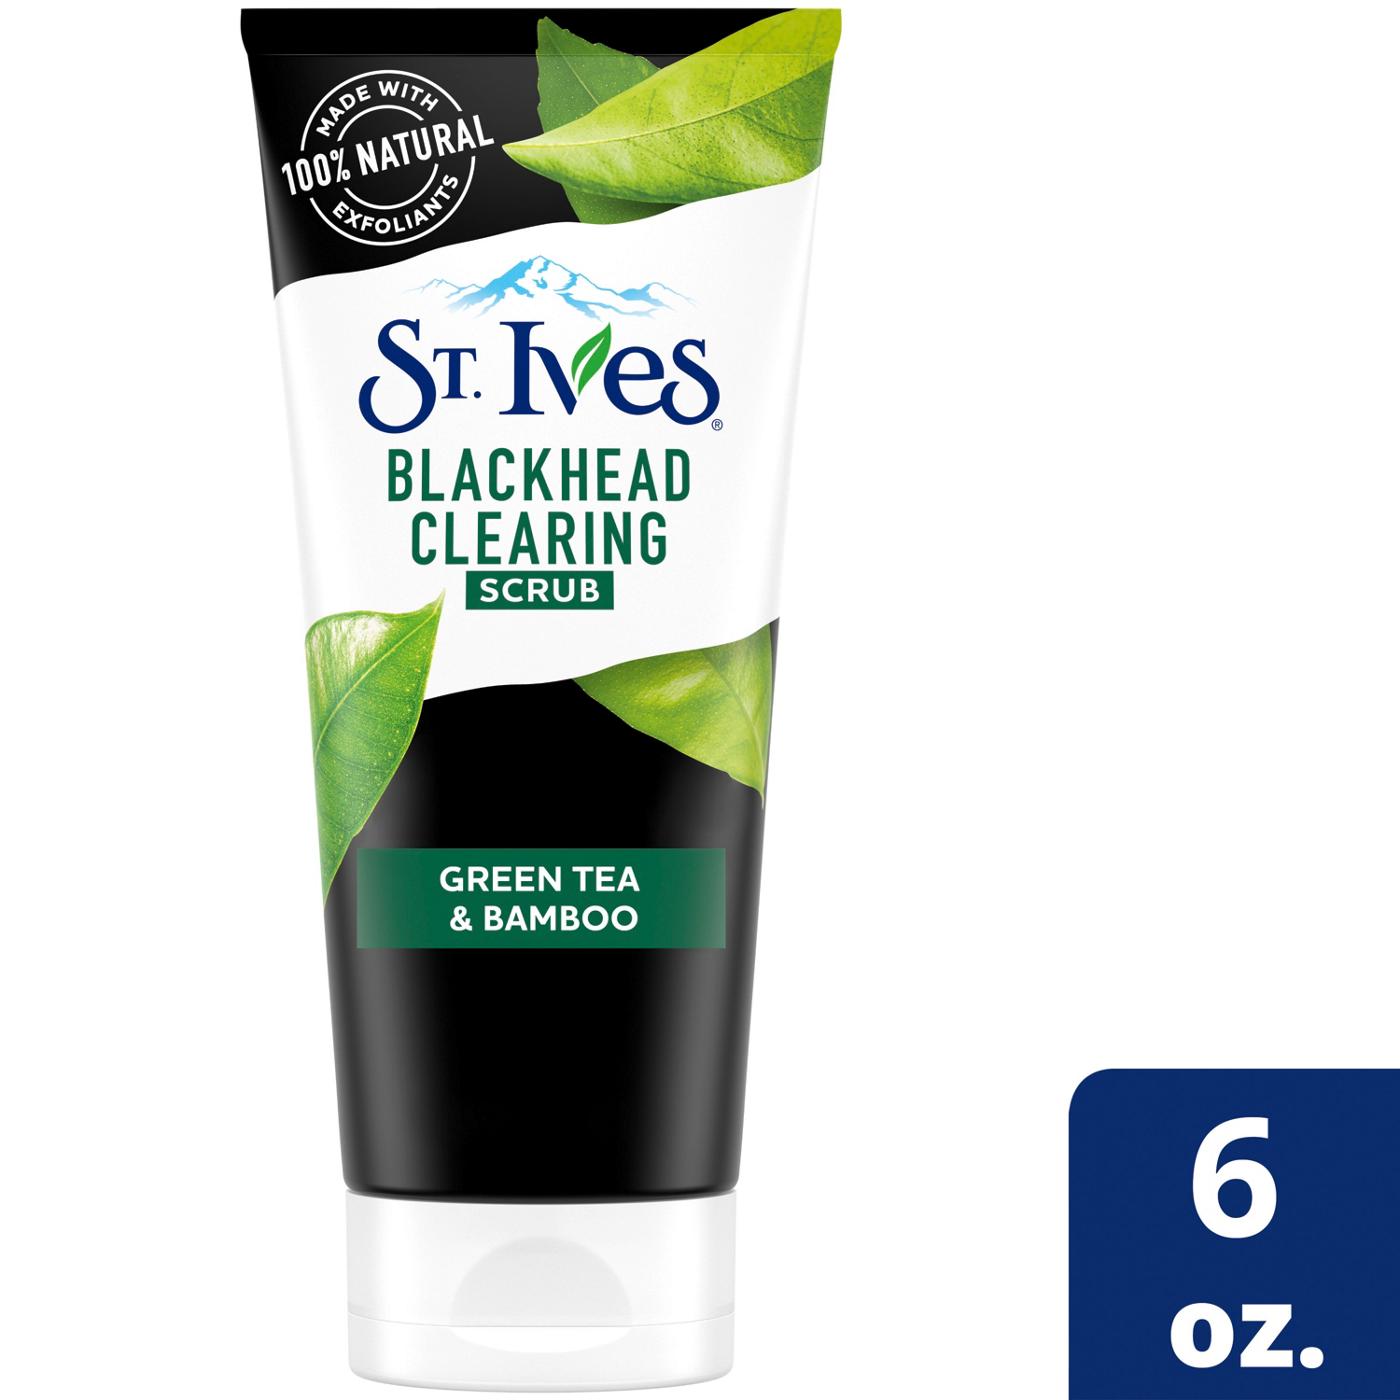 St. Ives Blackhead Clearing Green Tea & Bamboo Face Scrub; image 2 of 3